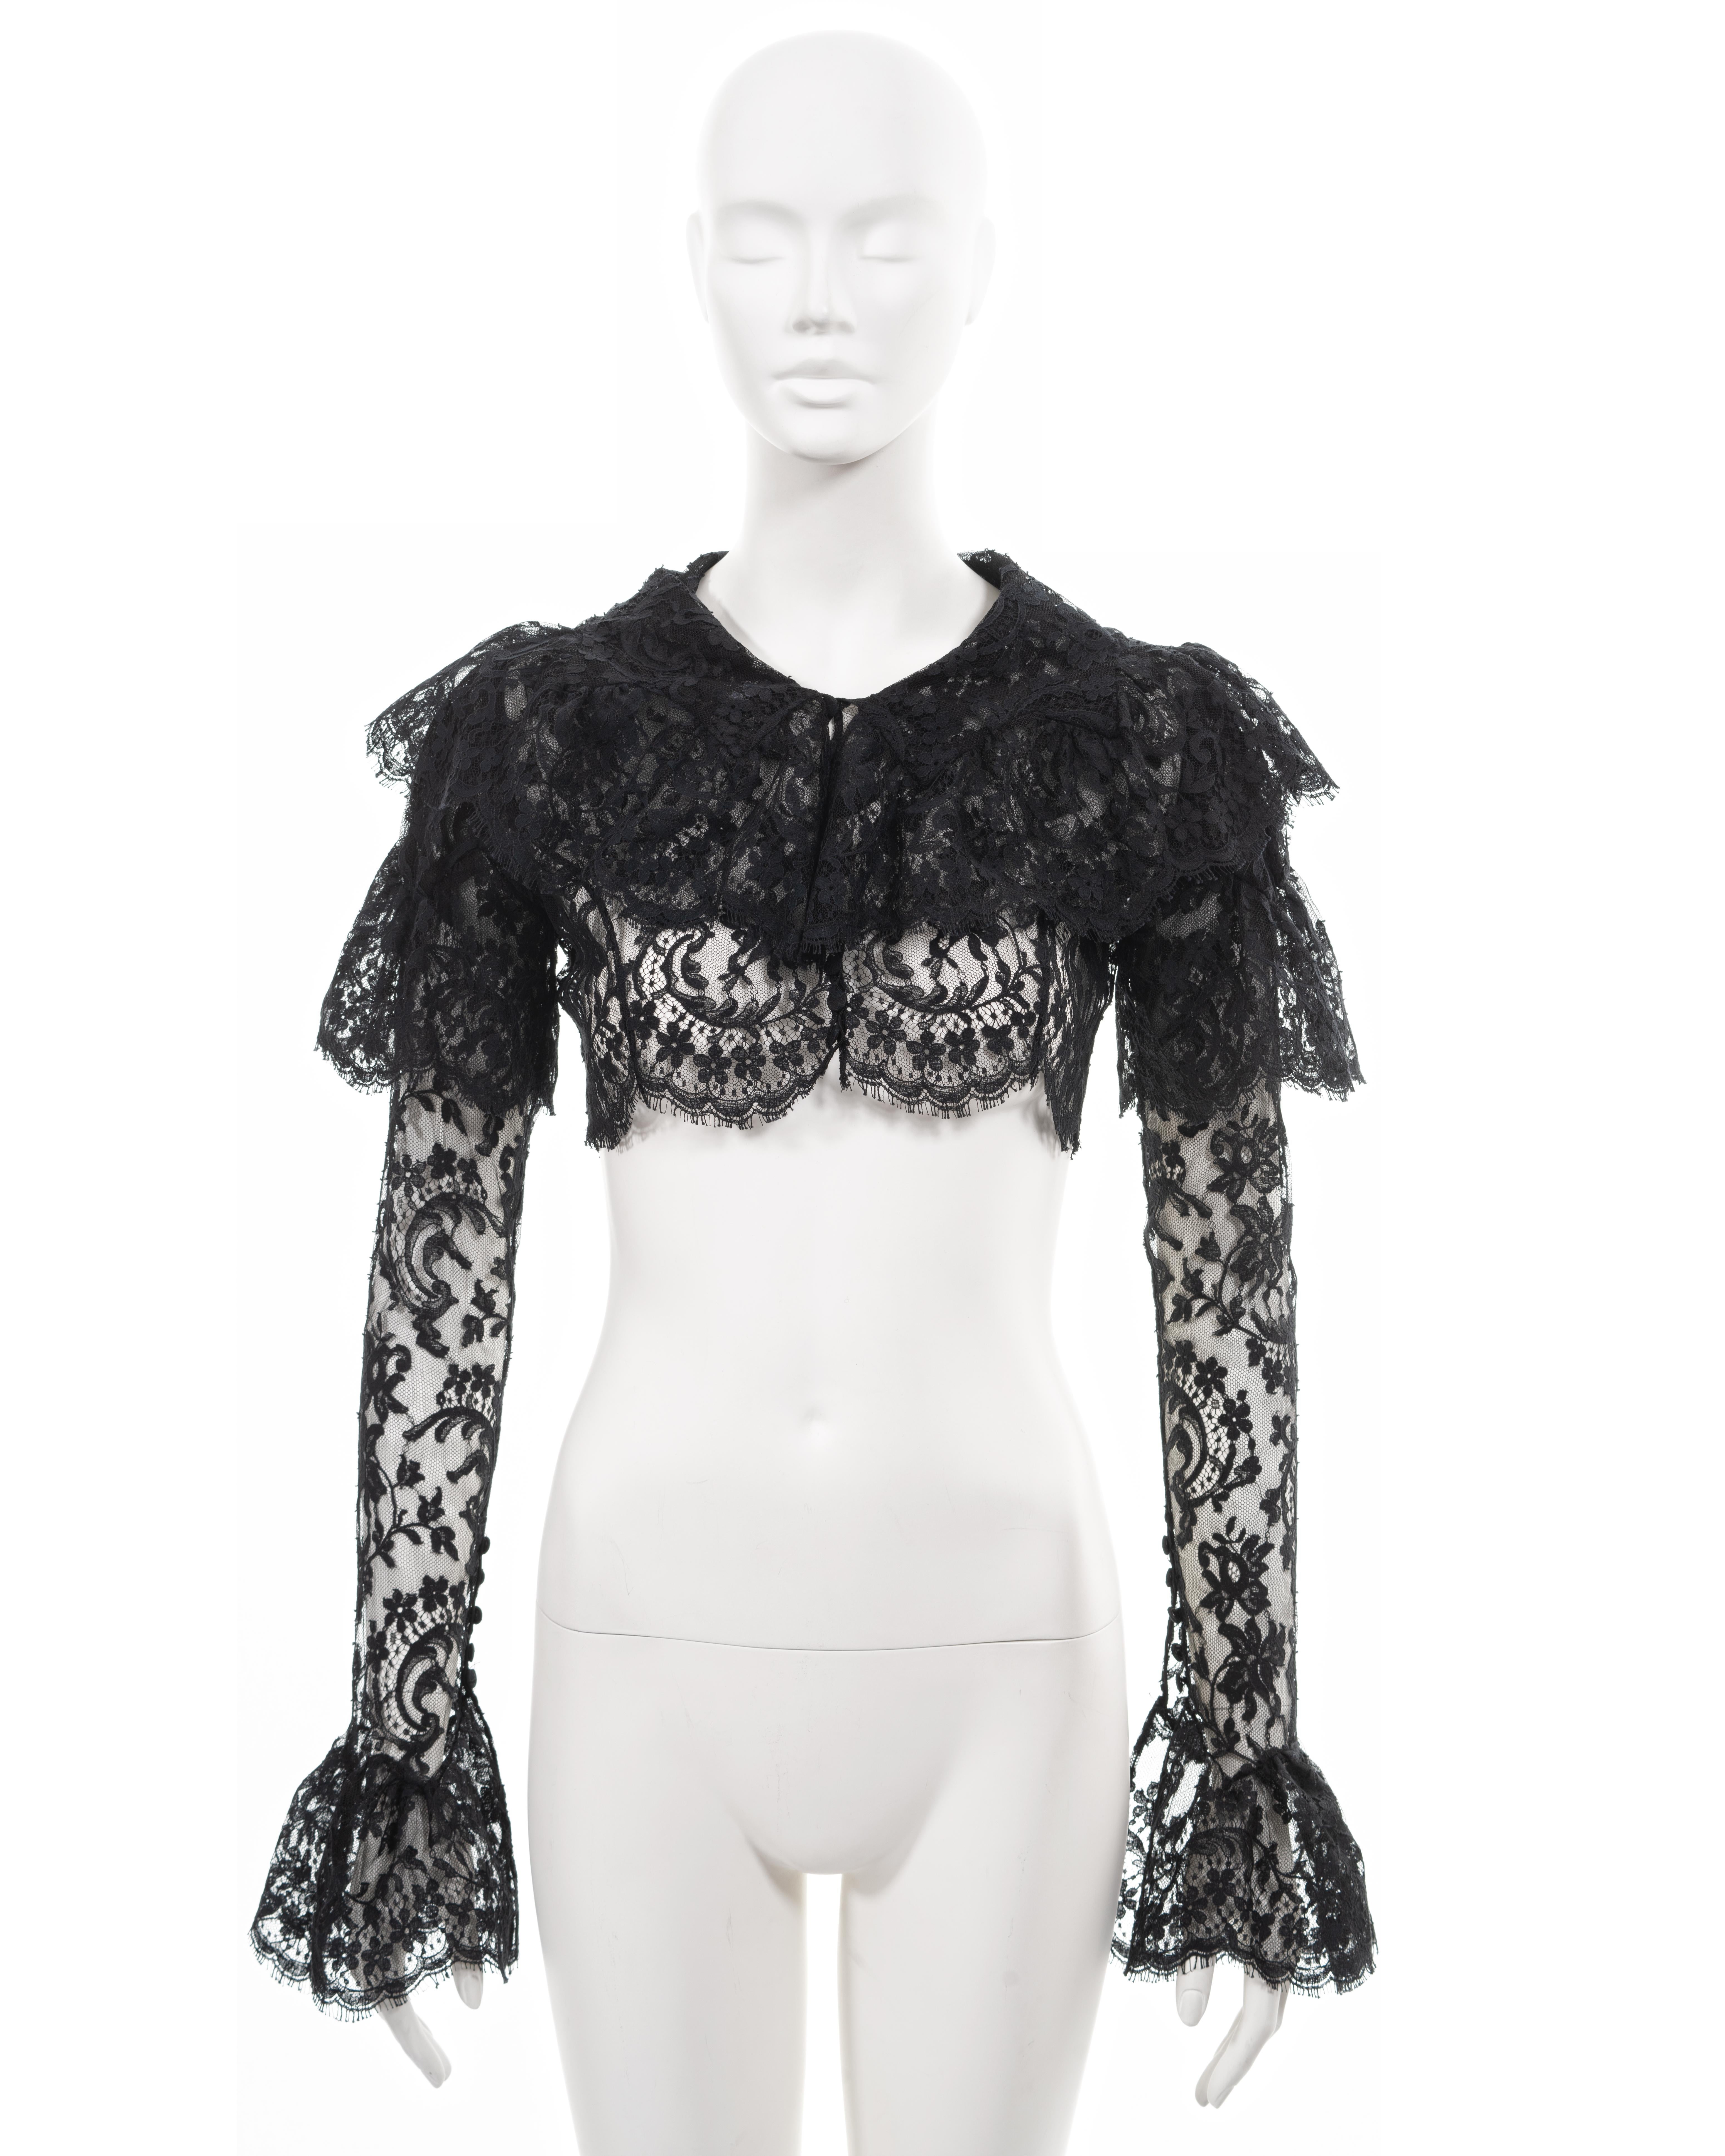 Givenchy by John Galliano black strapless evening dress and lace bolero, ss 1997 For Sale 6